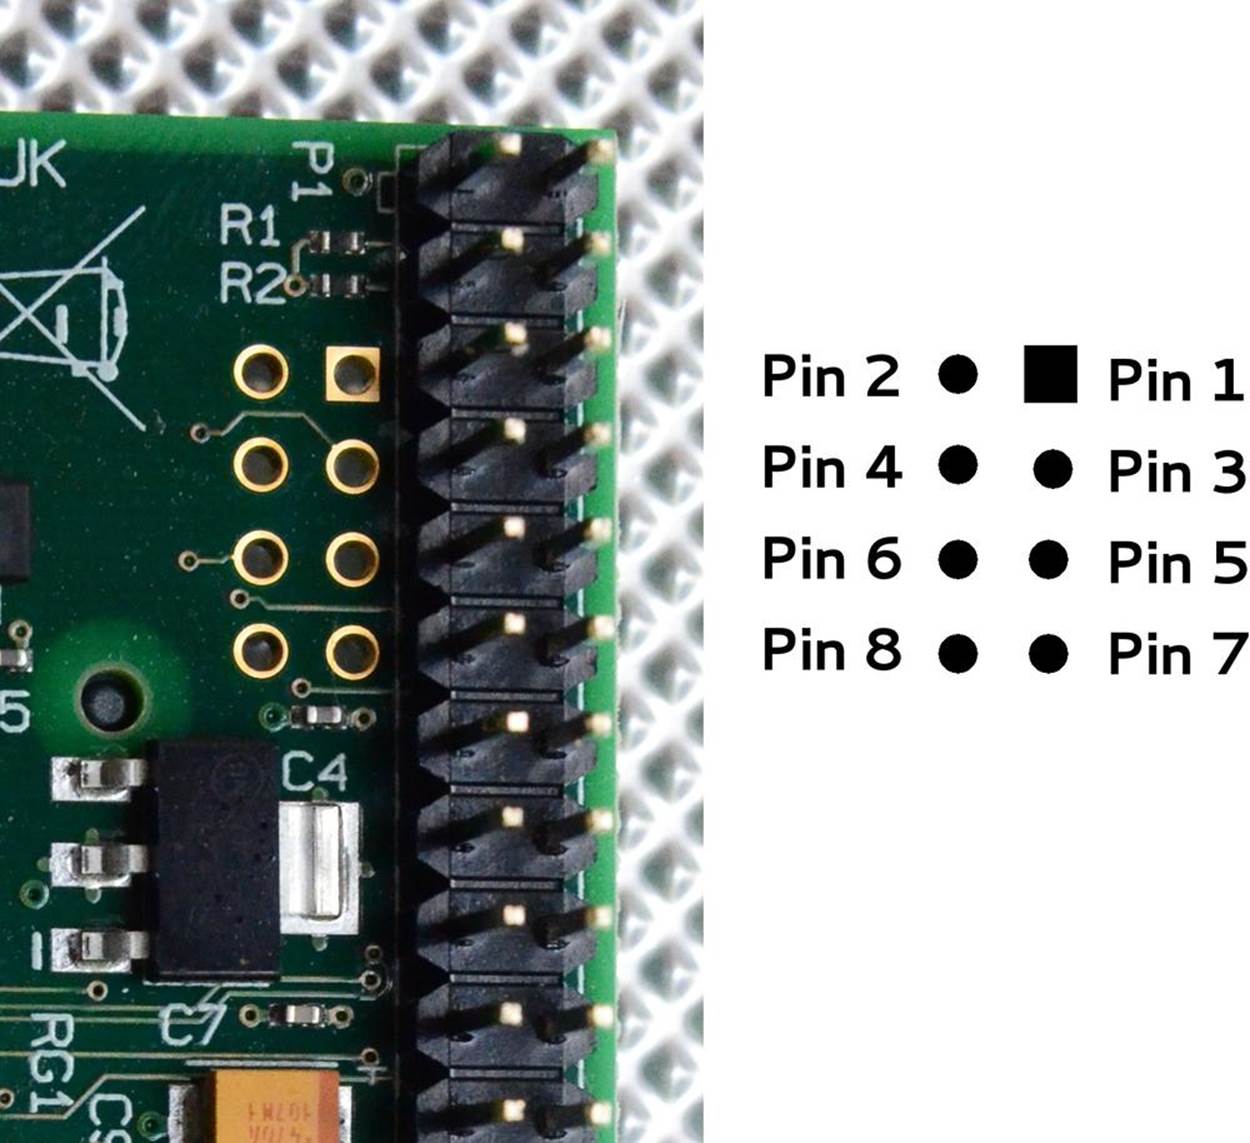 P5 pin order (Note that “P5” label is on bottom of the board)